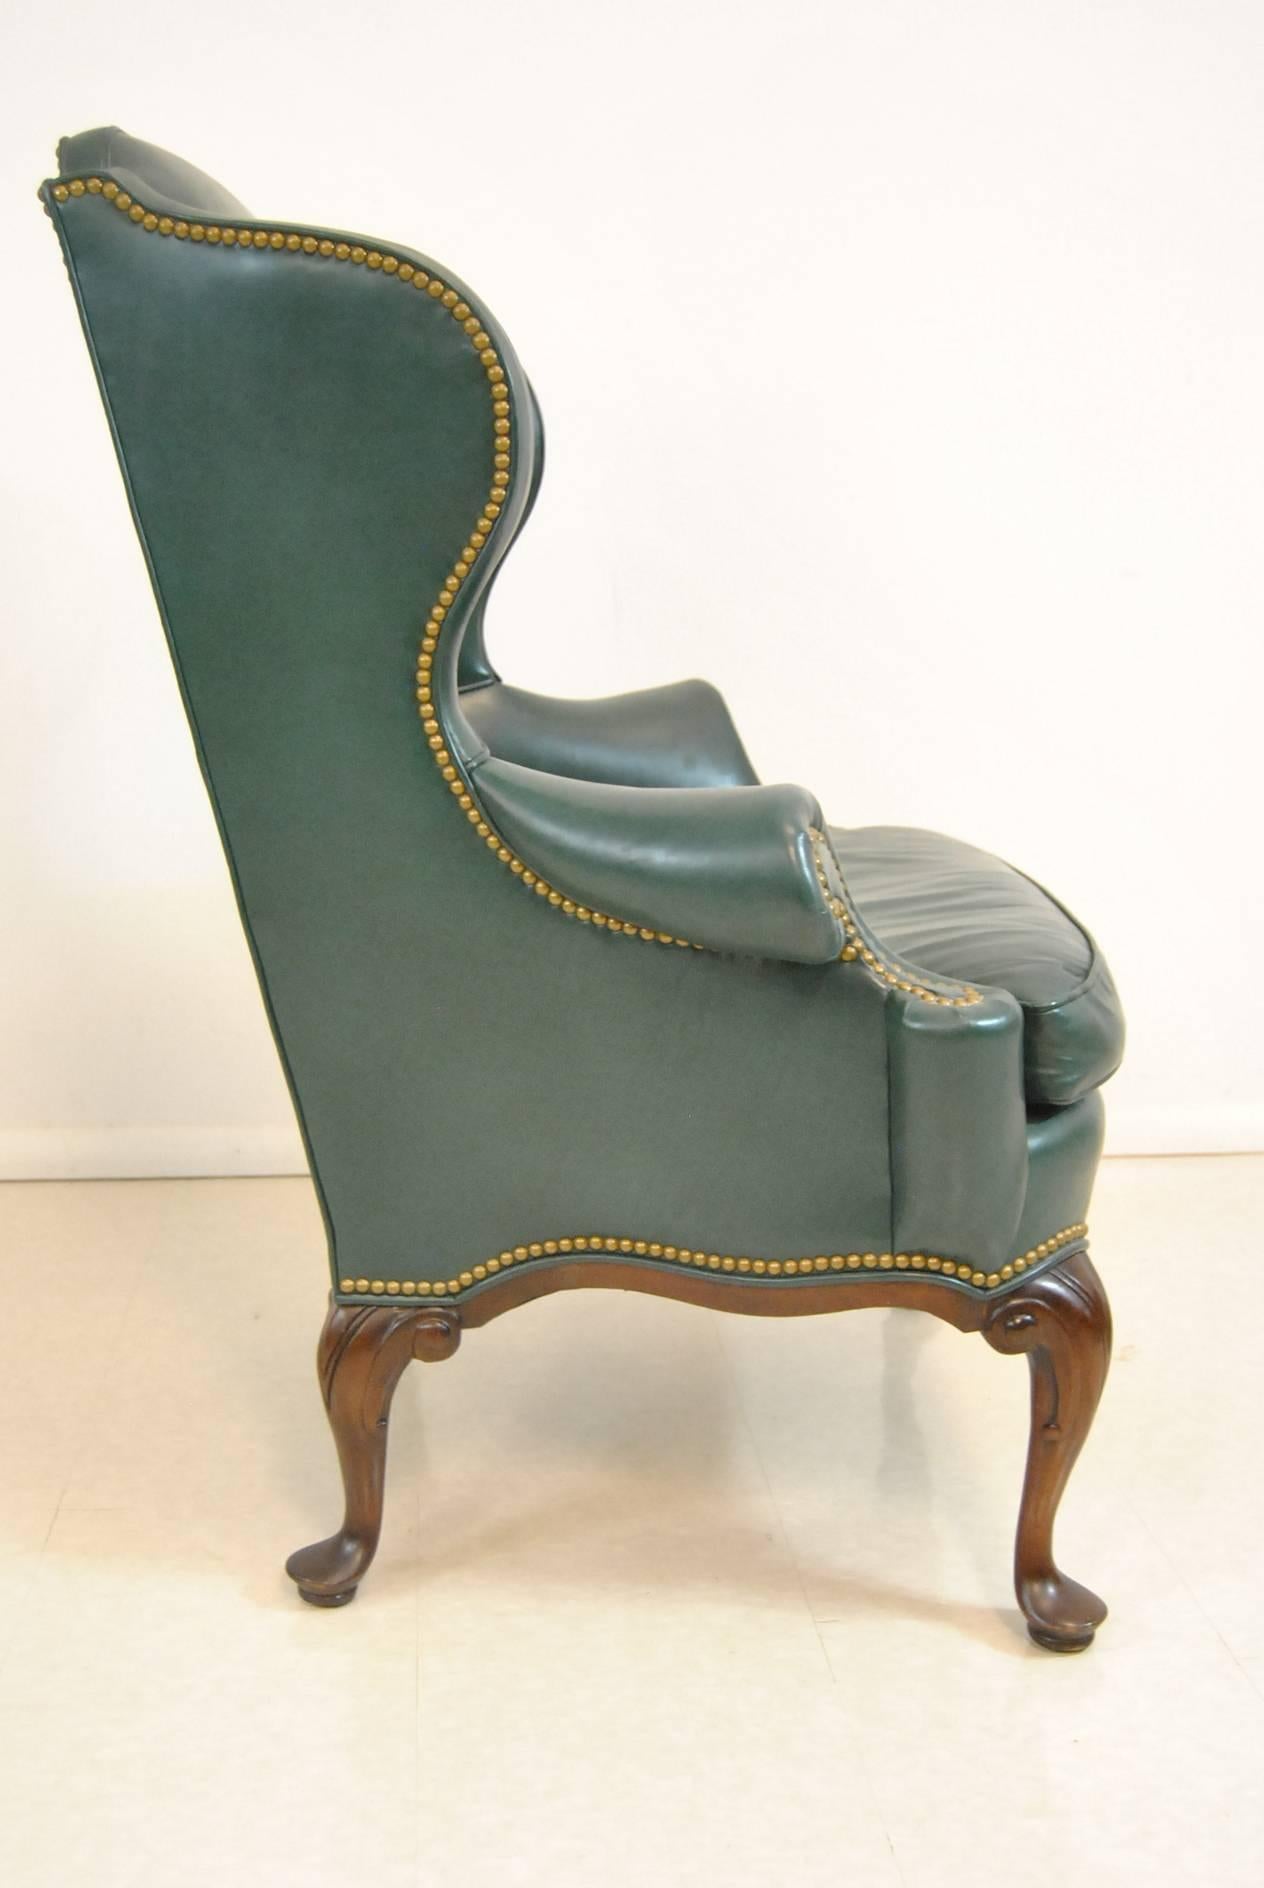 A handsome wingback chair by Hancock & Moore. This beautiful piece features green leather upholstery, brass nailhead trim and a walnut frame. Sophisticated and stylish this chair will make a statement in any room of your home. Very good condition